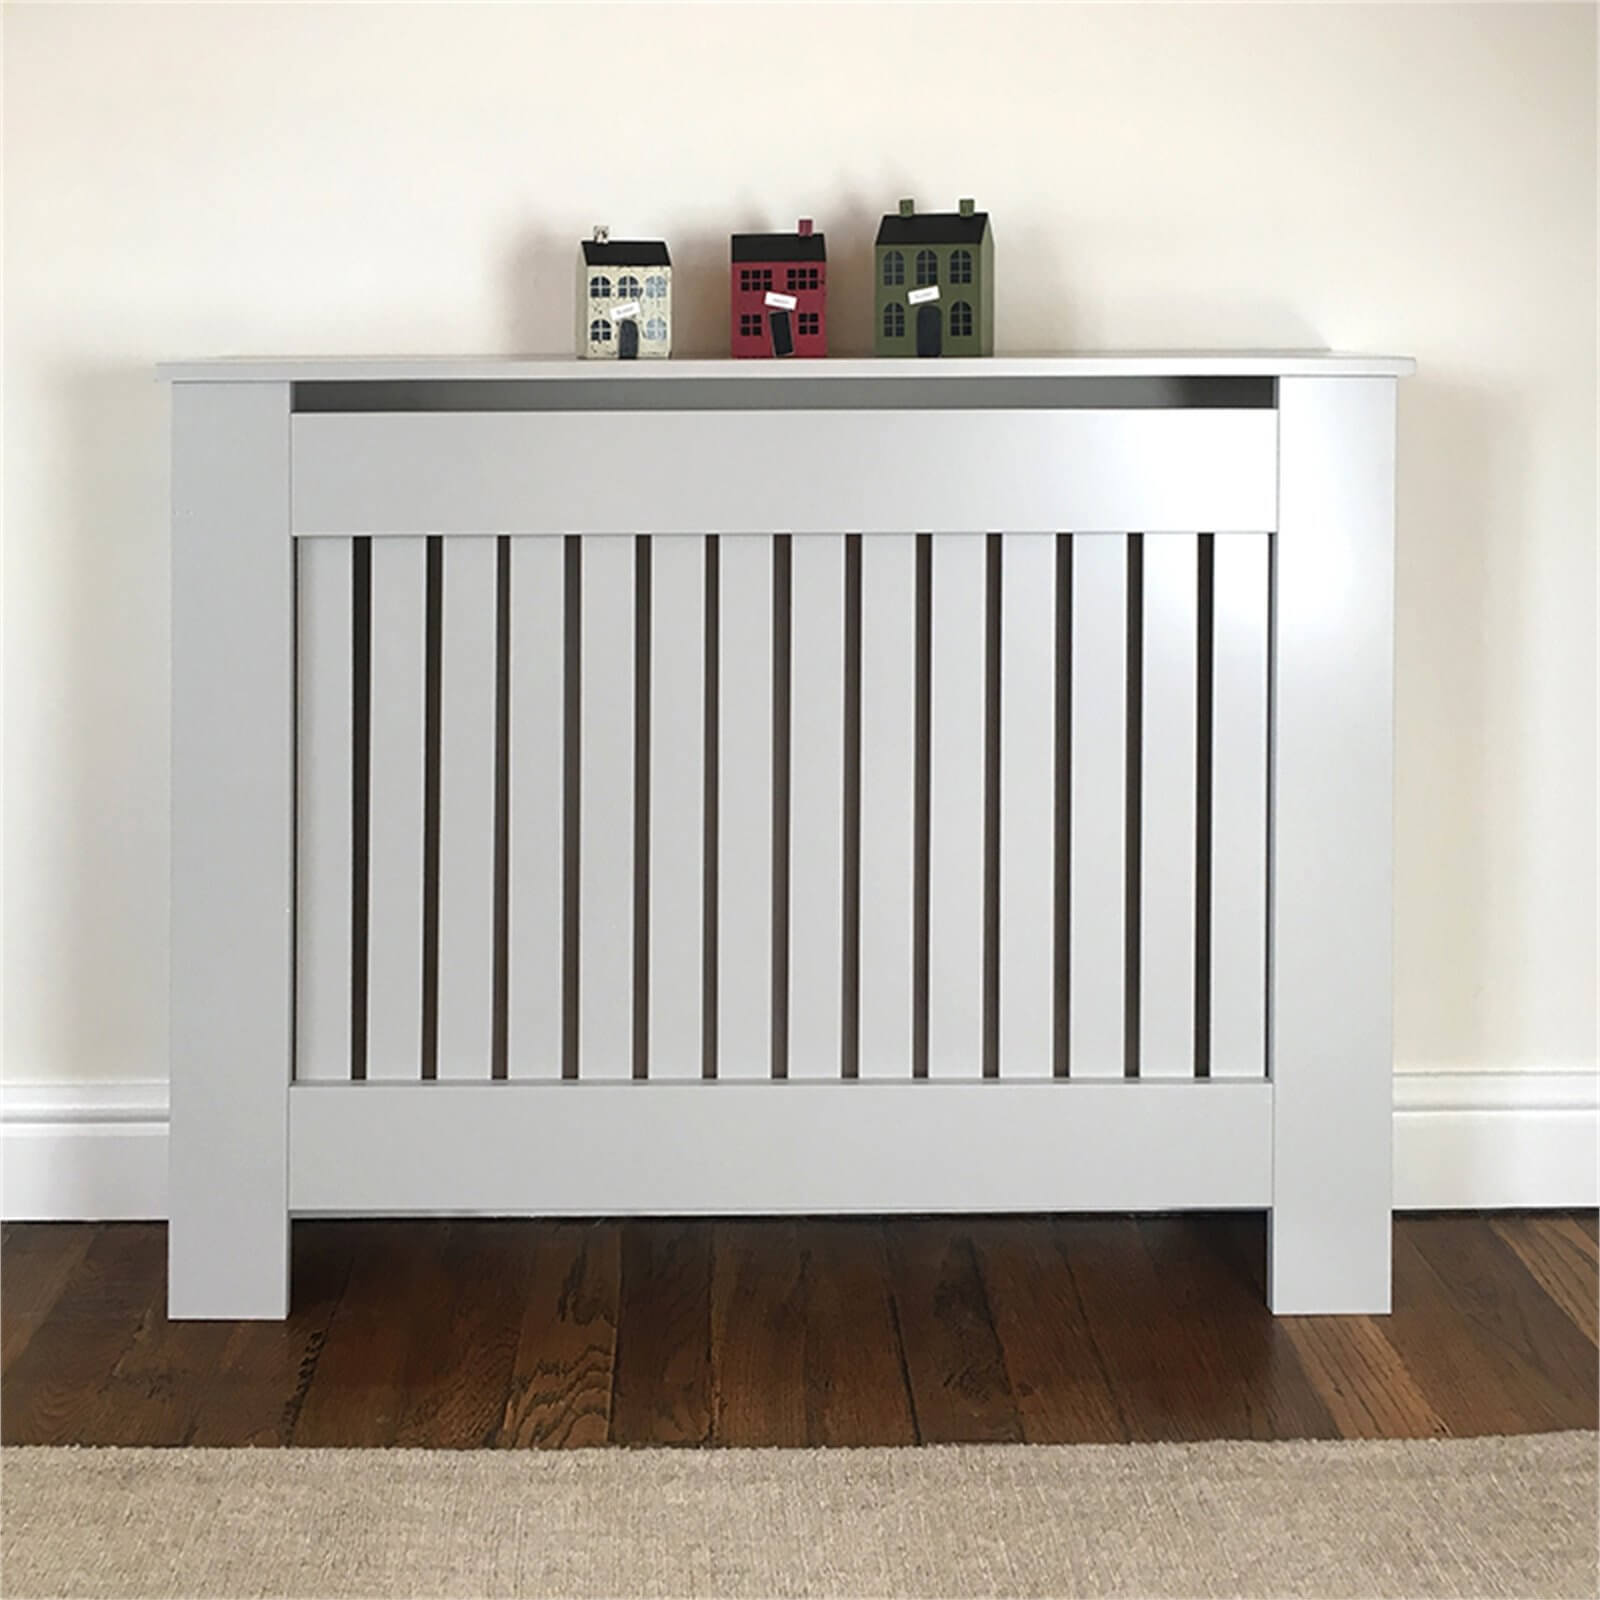 Radiator Cover with Vertical Slatted Design in Grey - Small